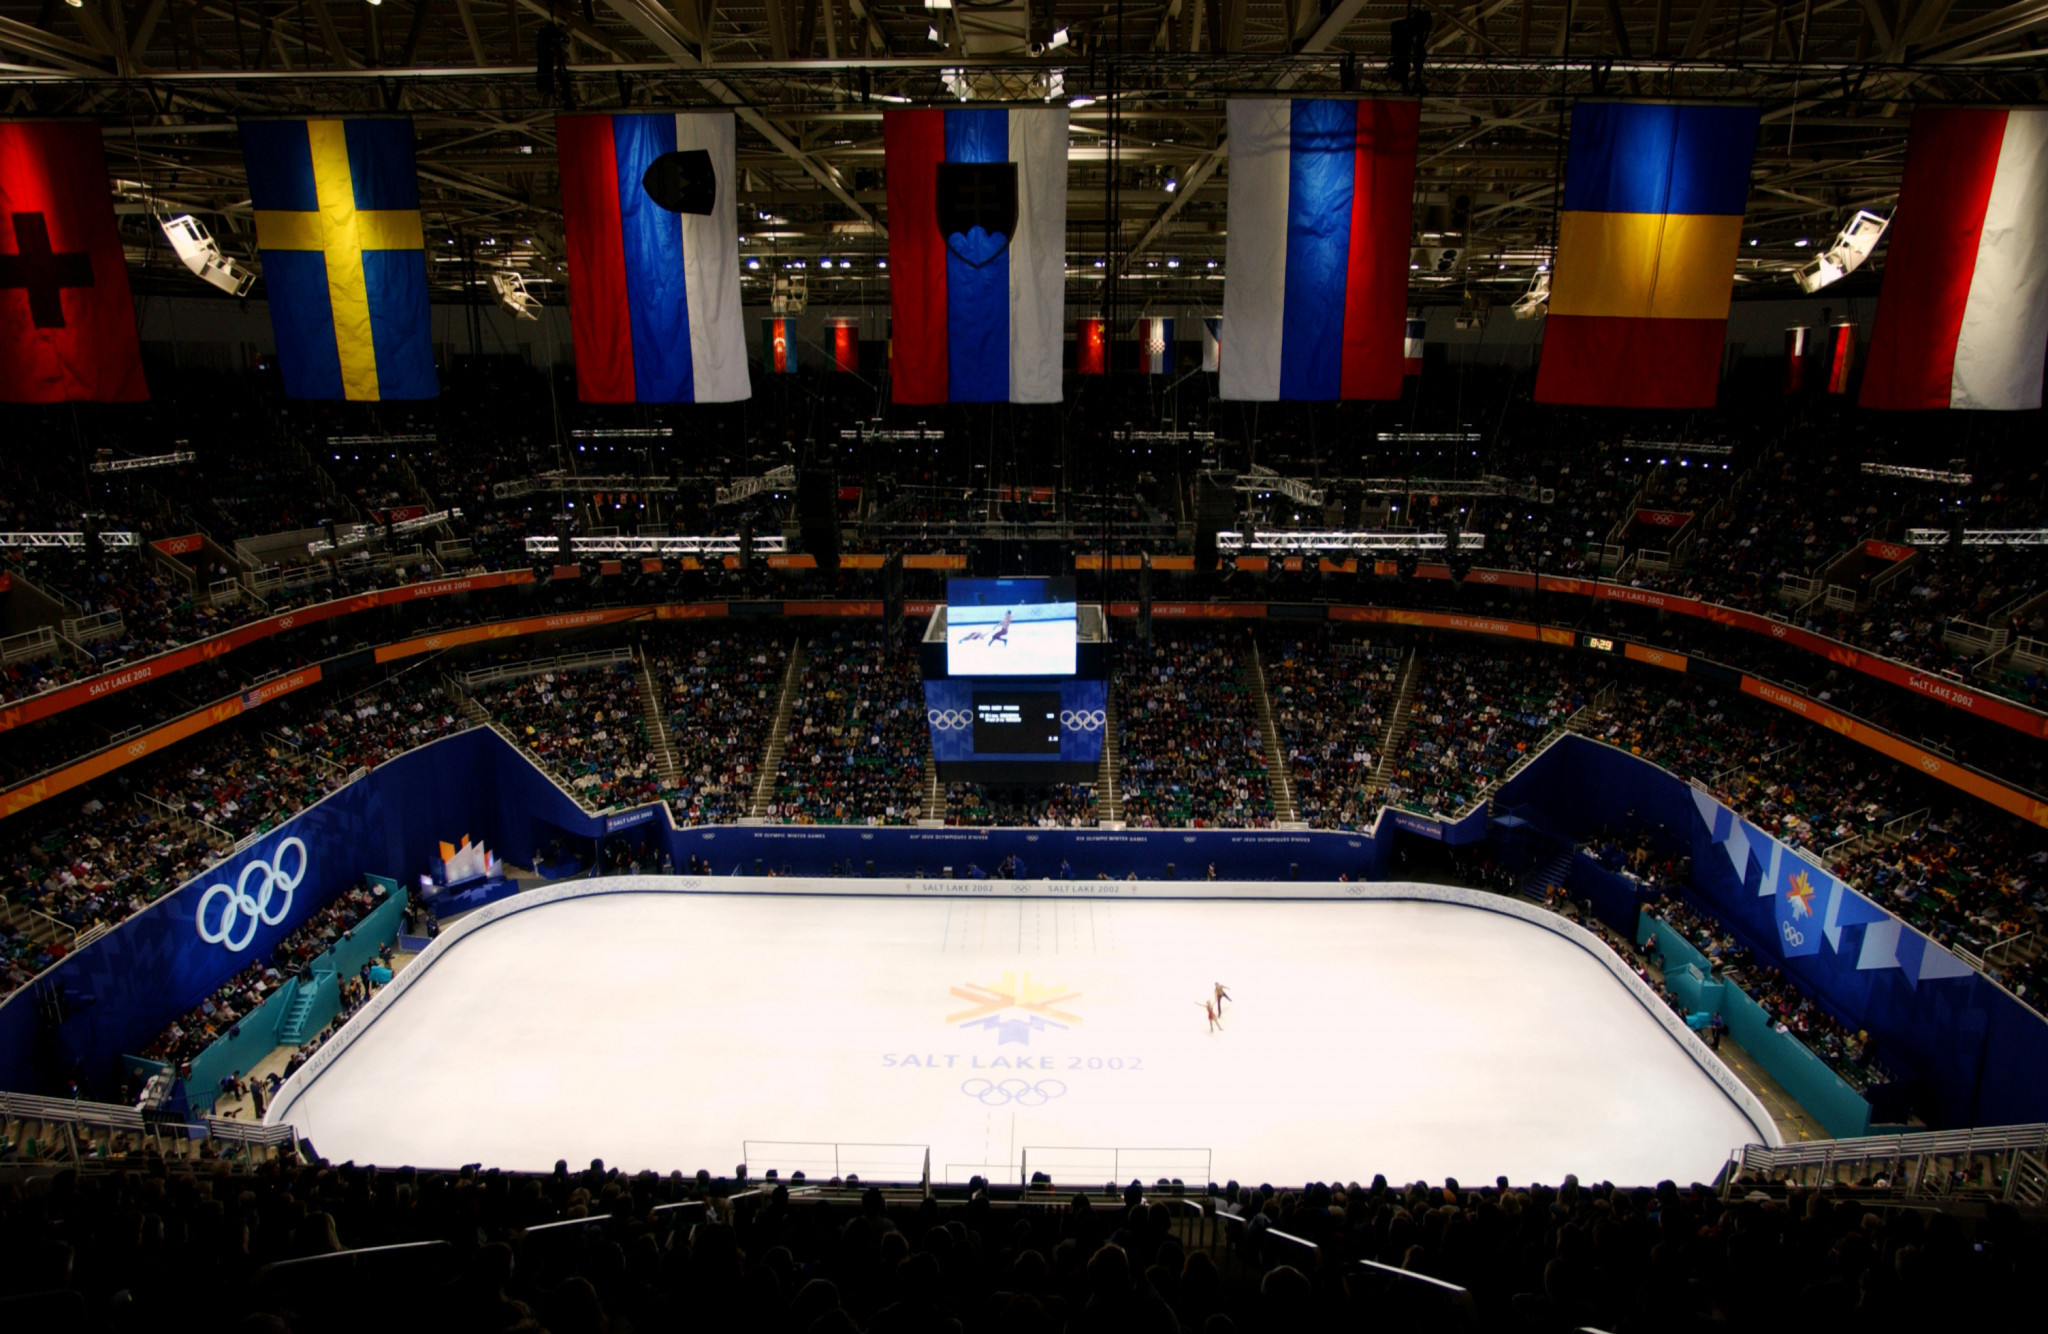 The Vivint Arena was a venue for the Salt Lake City 2002 Winter Olympics ©Getty Images